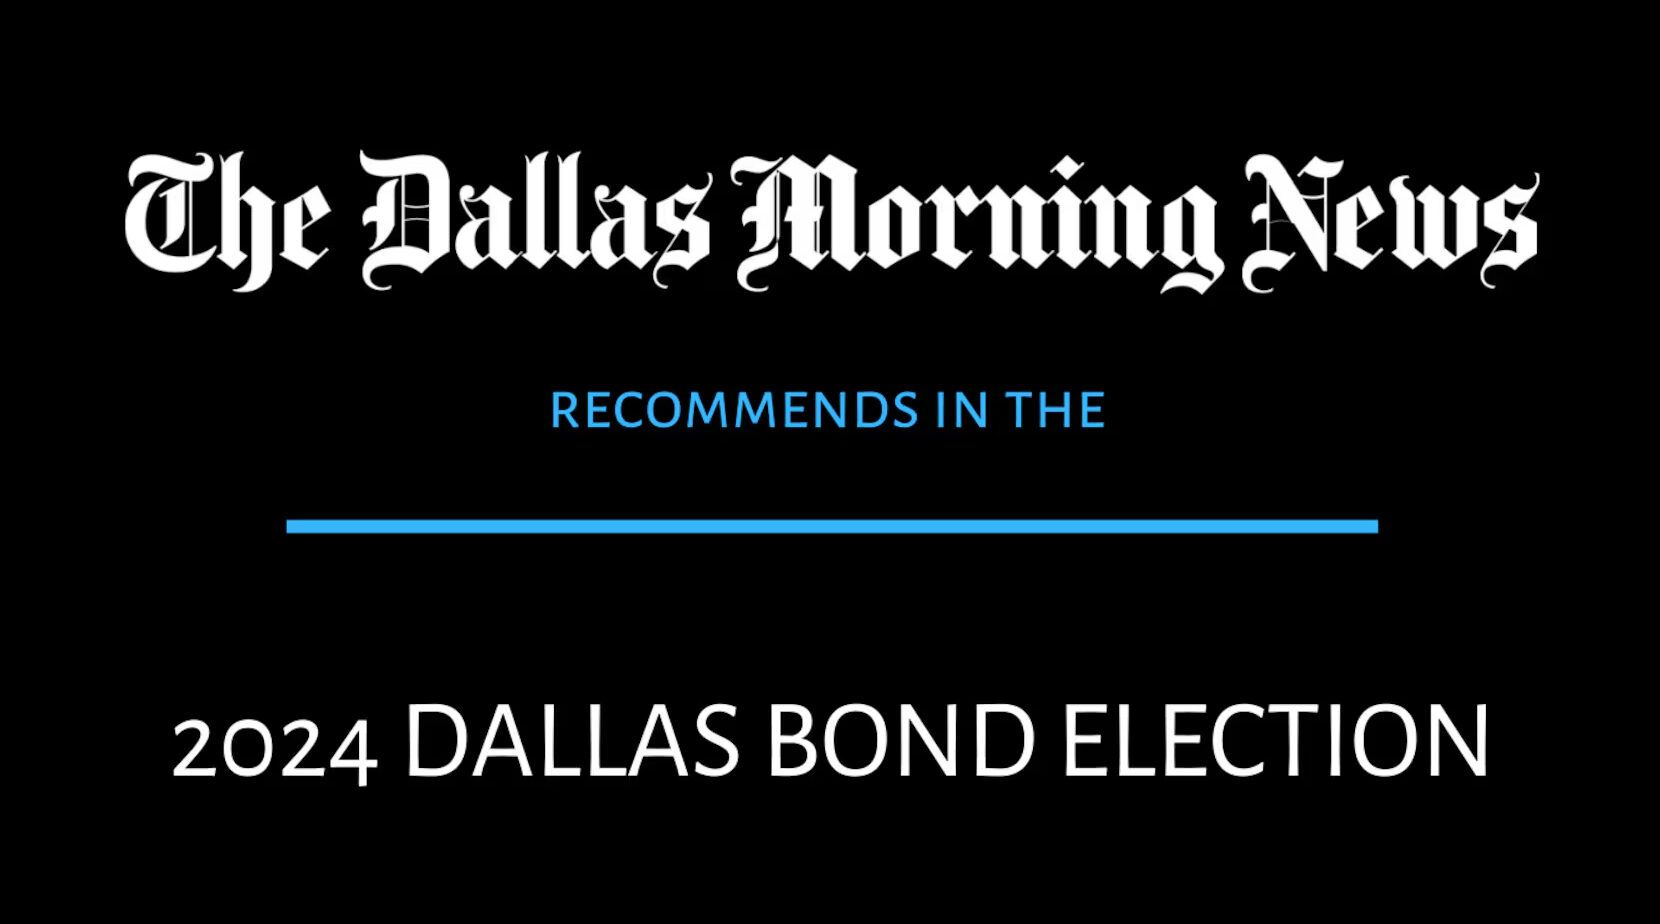 The Dallas Morning News recommends